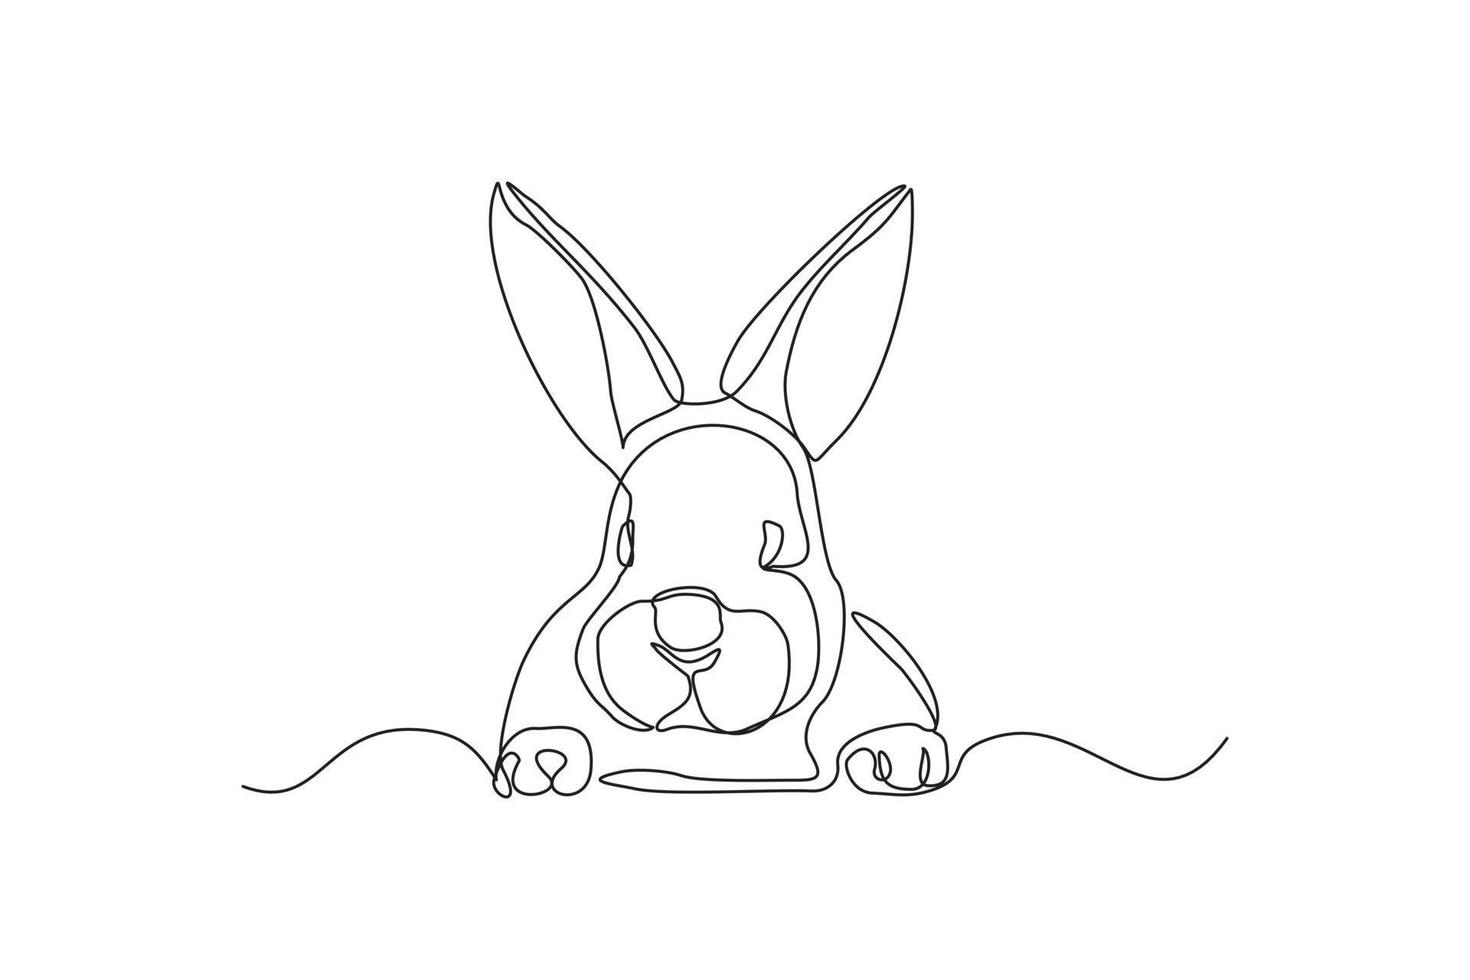 Continuous line drawing of cute rabbit squirell portrait close up. Single one line art of beautiful bunny rabbit head animal pet. Vector illustration